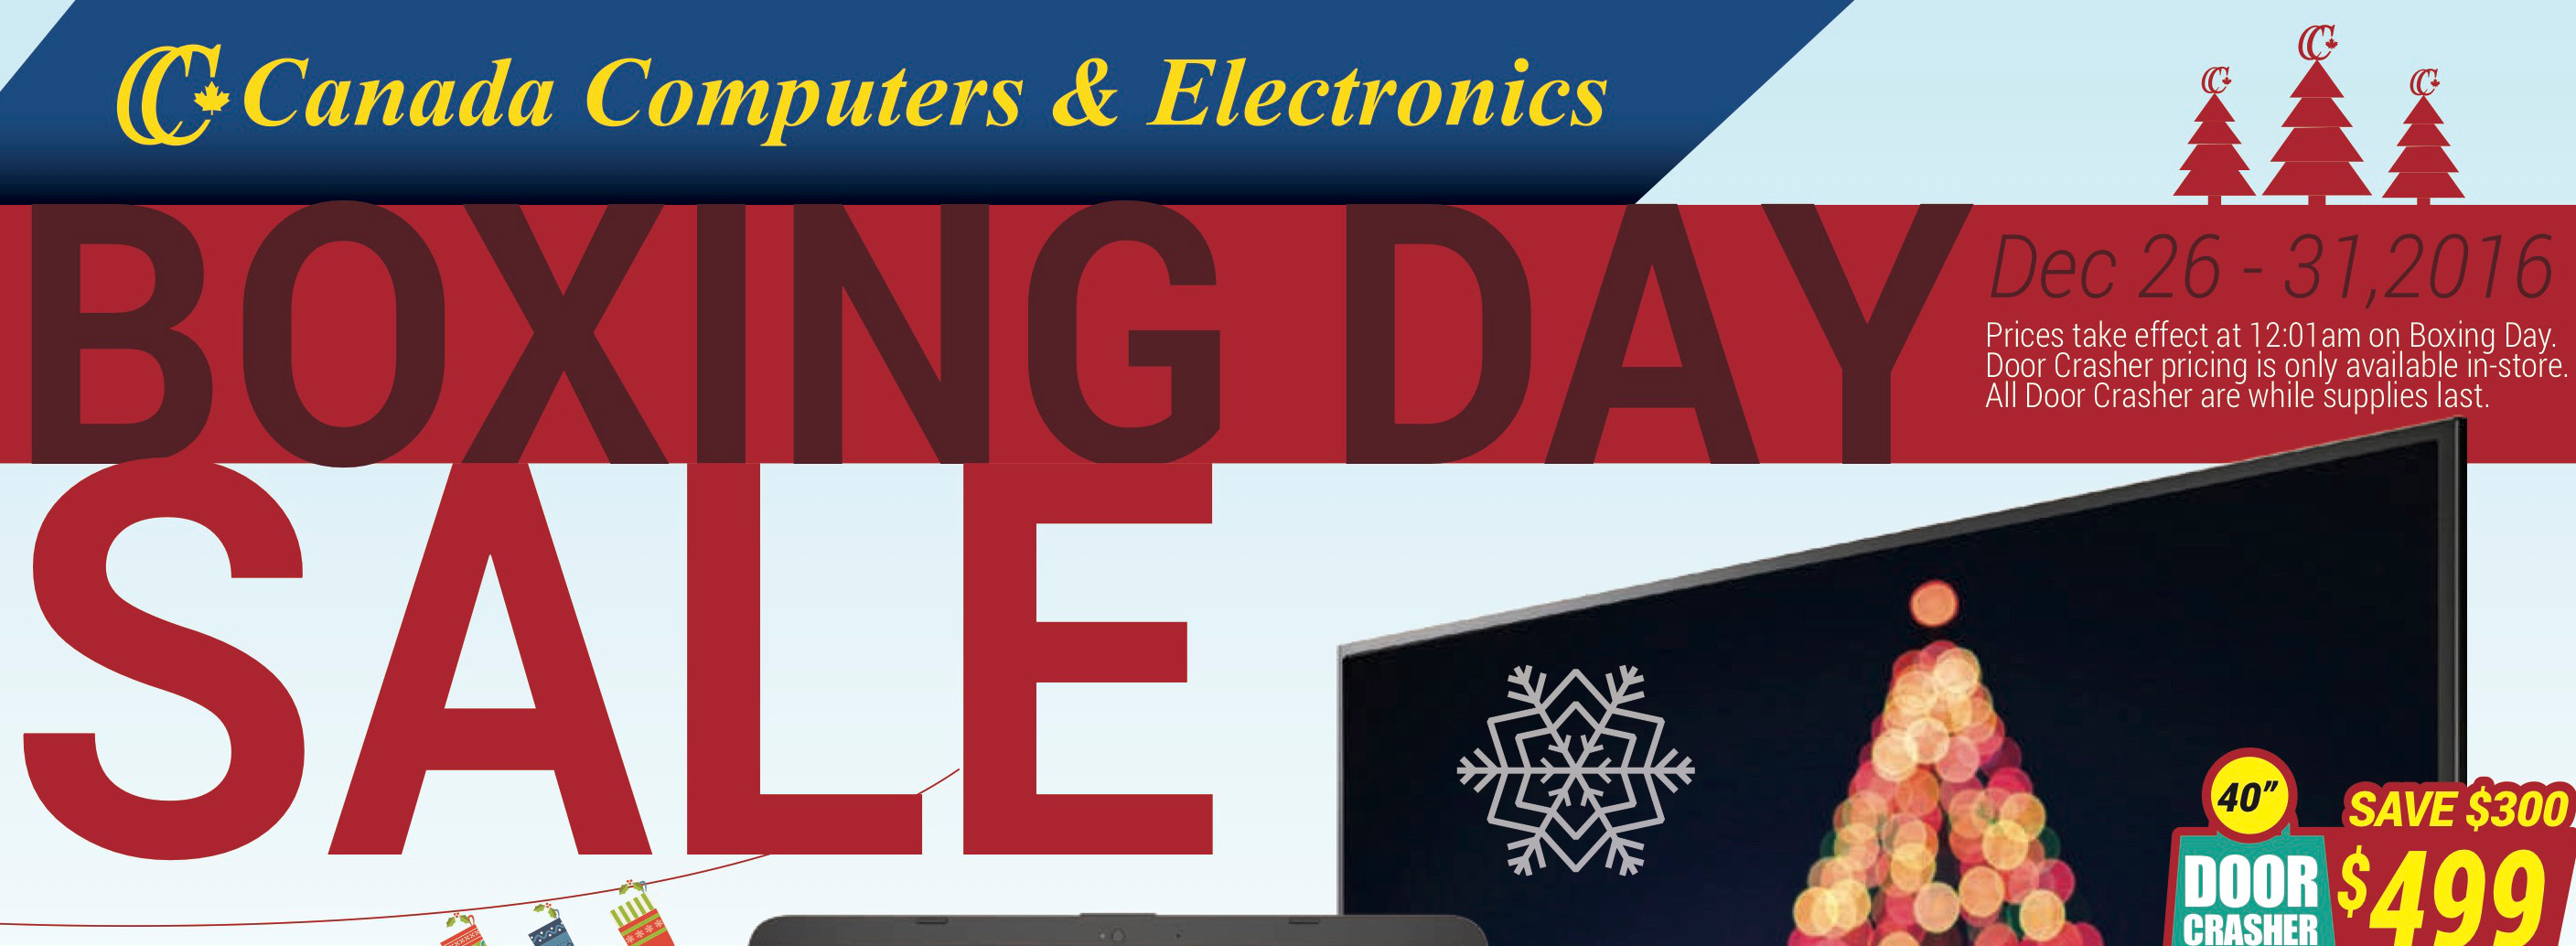 london-drugs-boxing-day-flyer